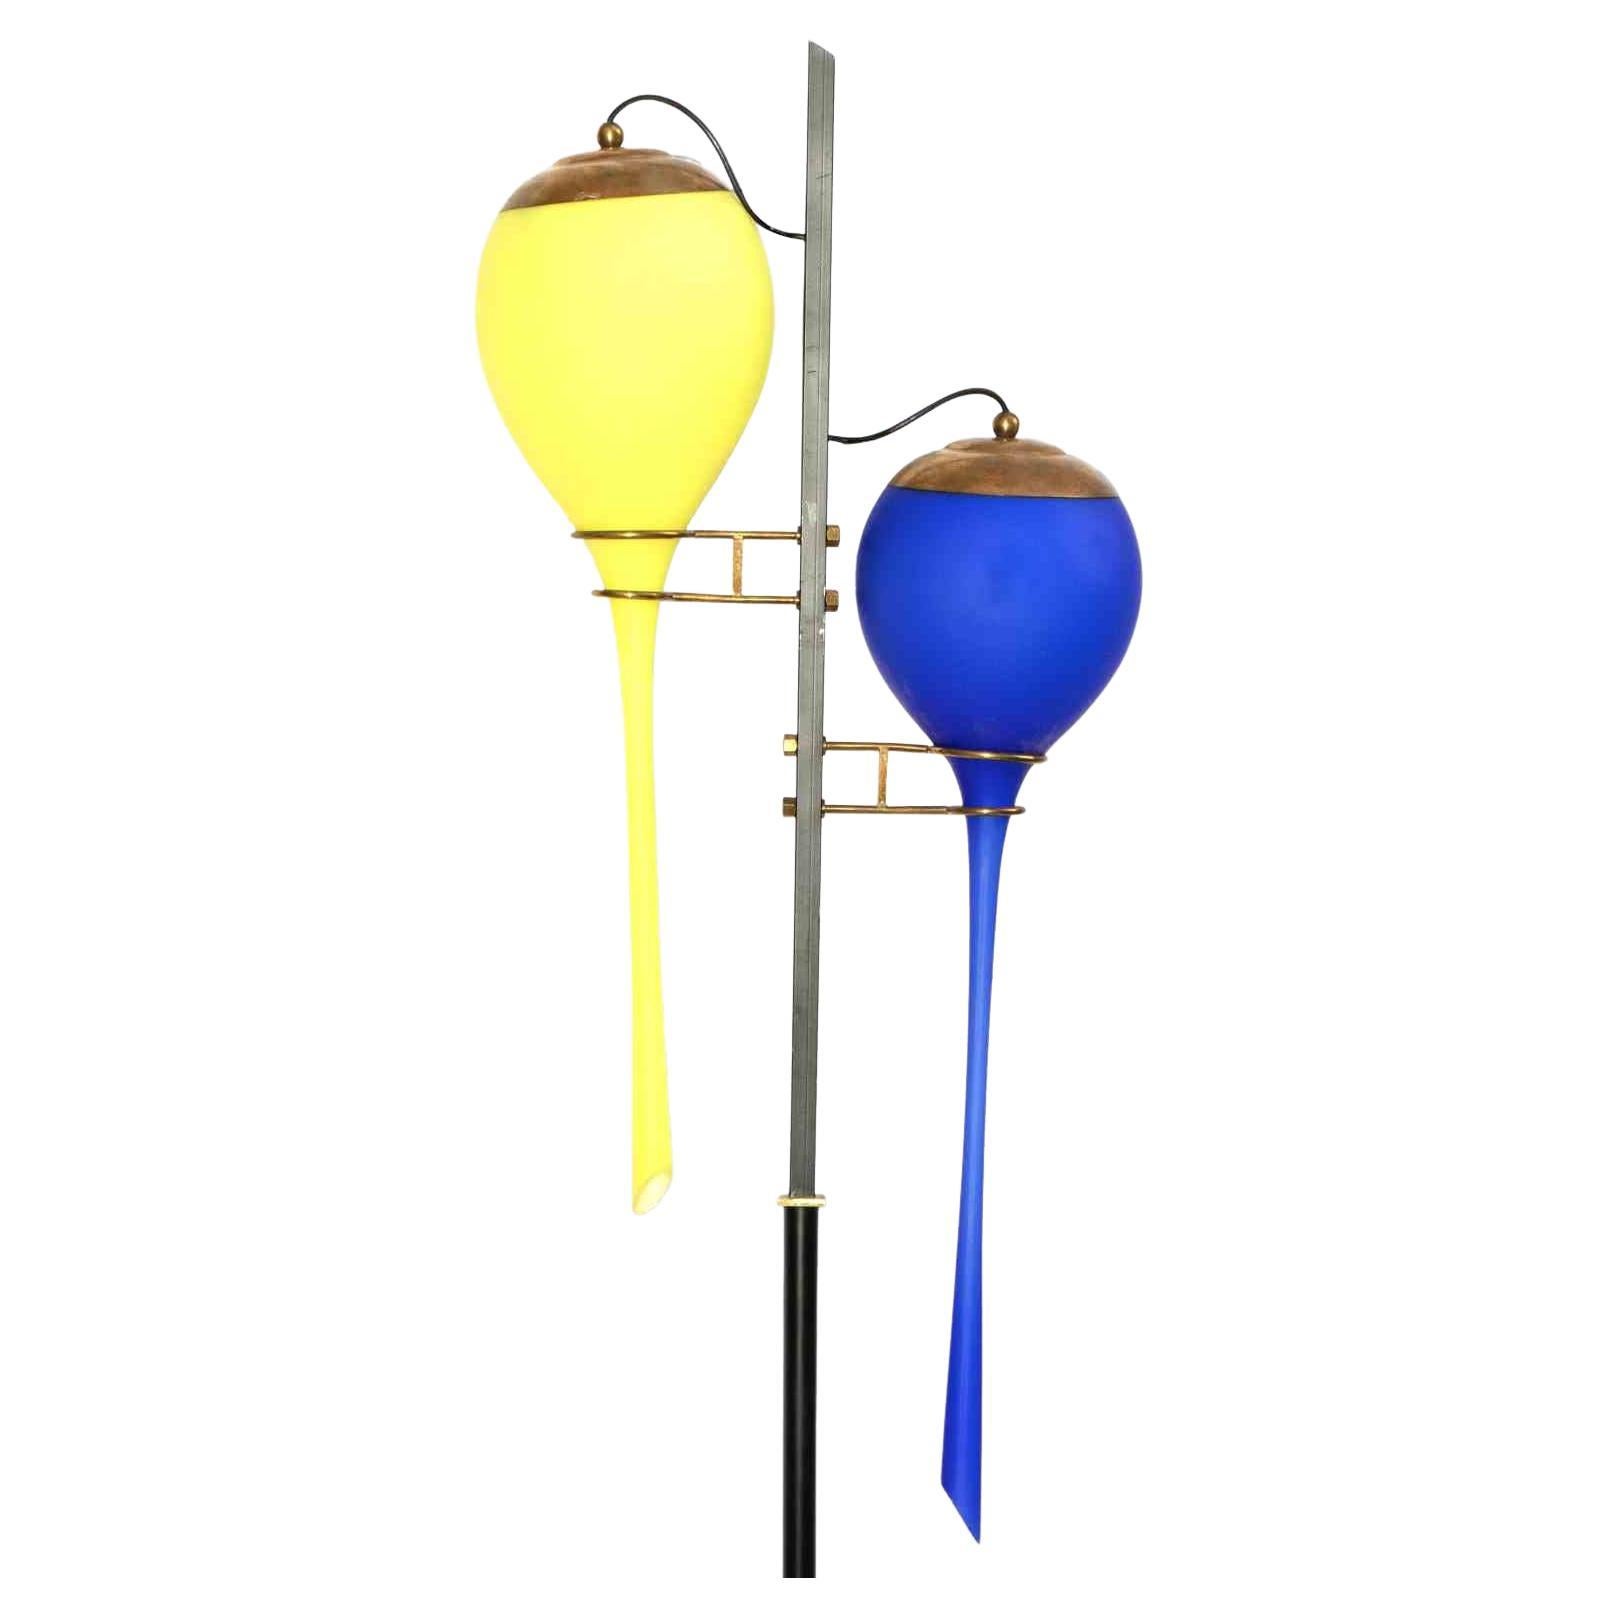 Yellow and Blue Stilnovo lamp is a design item realized in the mid-20th Century for Stilnovo.

Marble base, black painted metal stem, blue and yellow colored glass diffusers.

Very good condition.

Collect a design lamp!